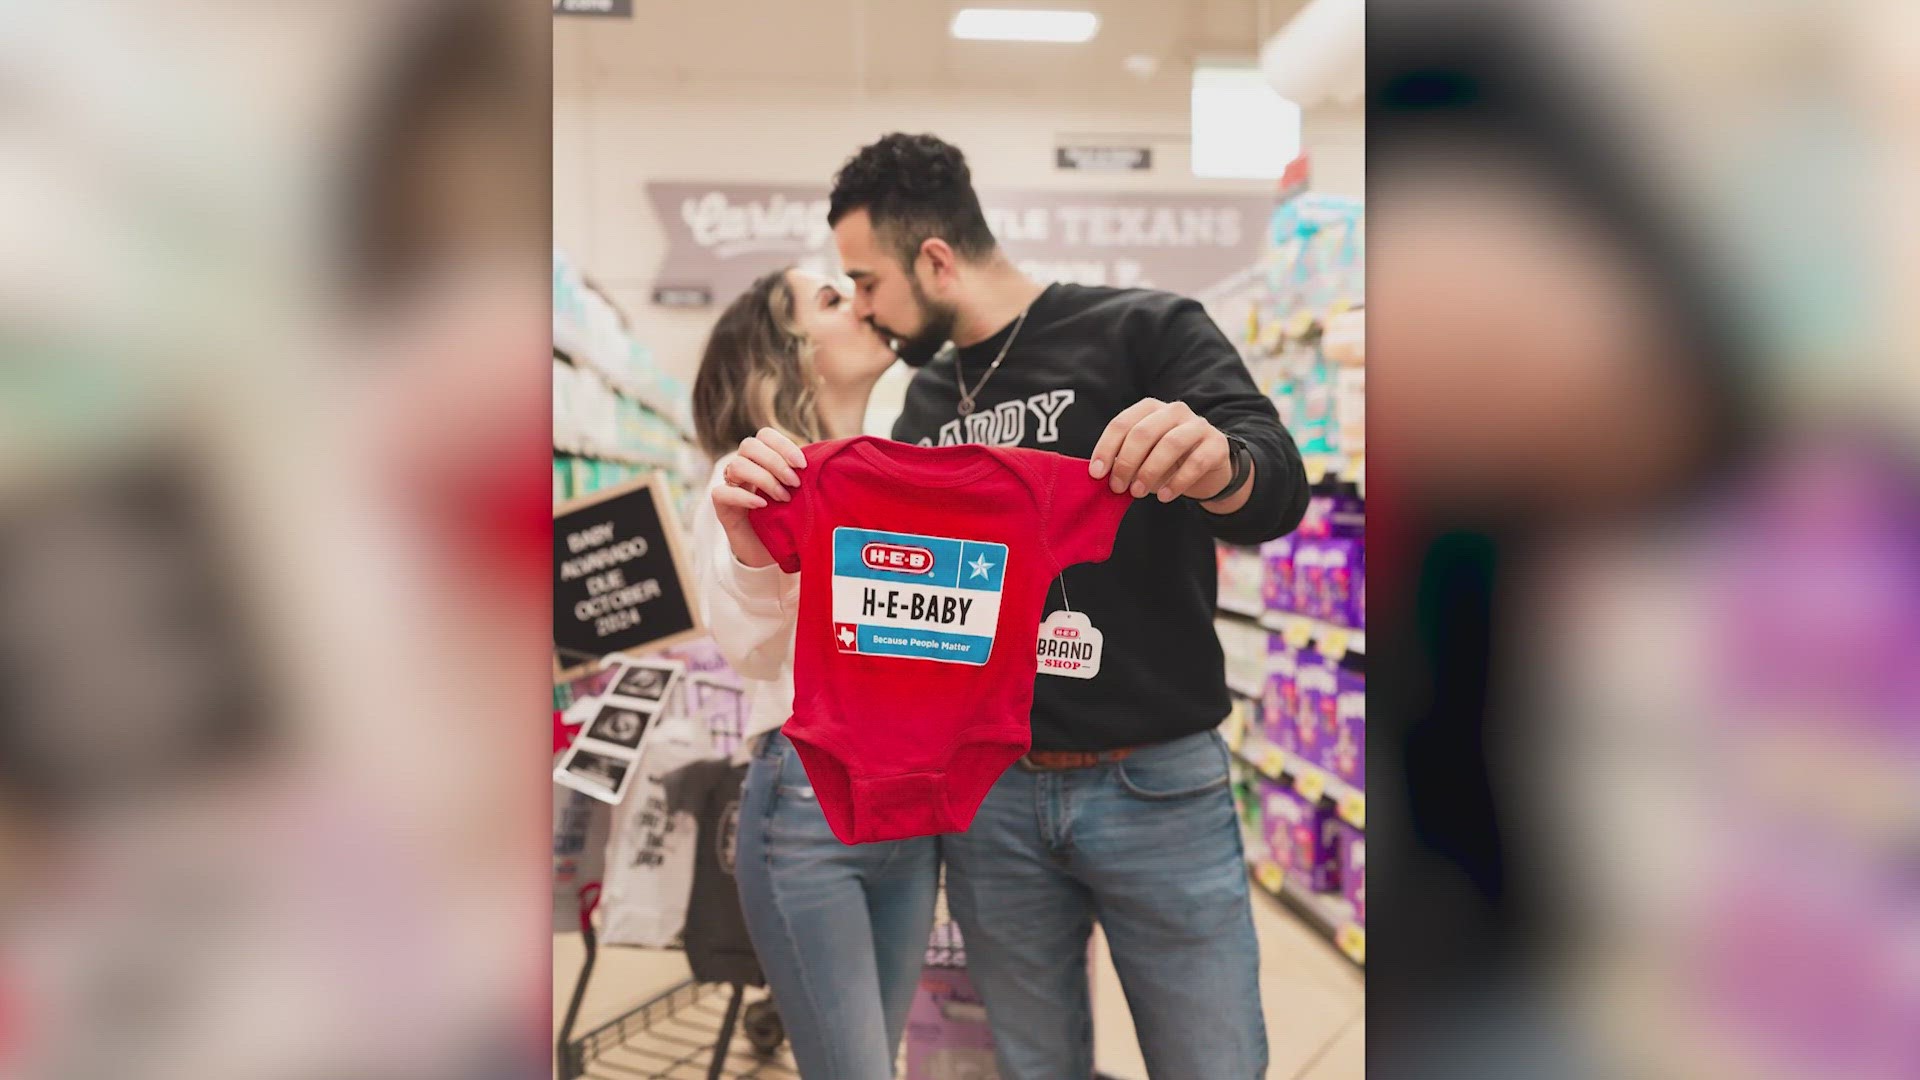 Since Jacob has worked at an H-E-B warehouse for over a decade, he and Zoey felt it was right to use the company in their announcement.